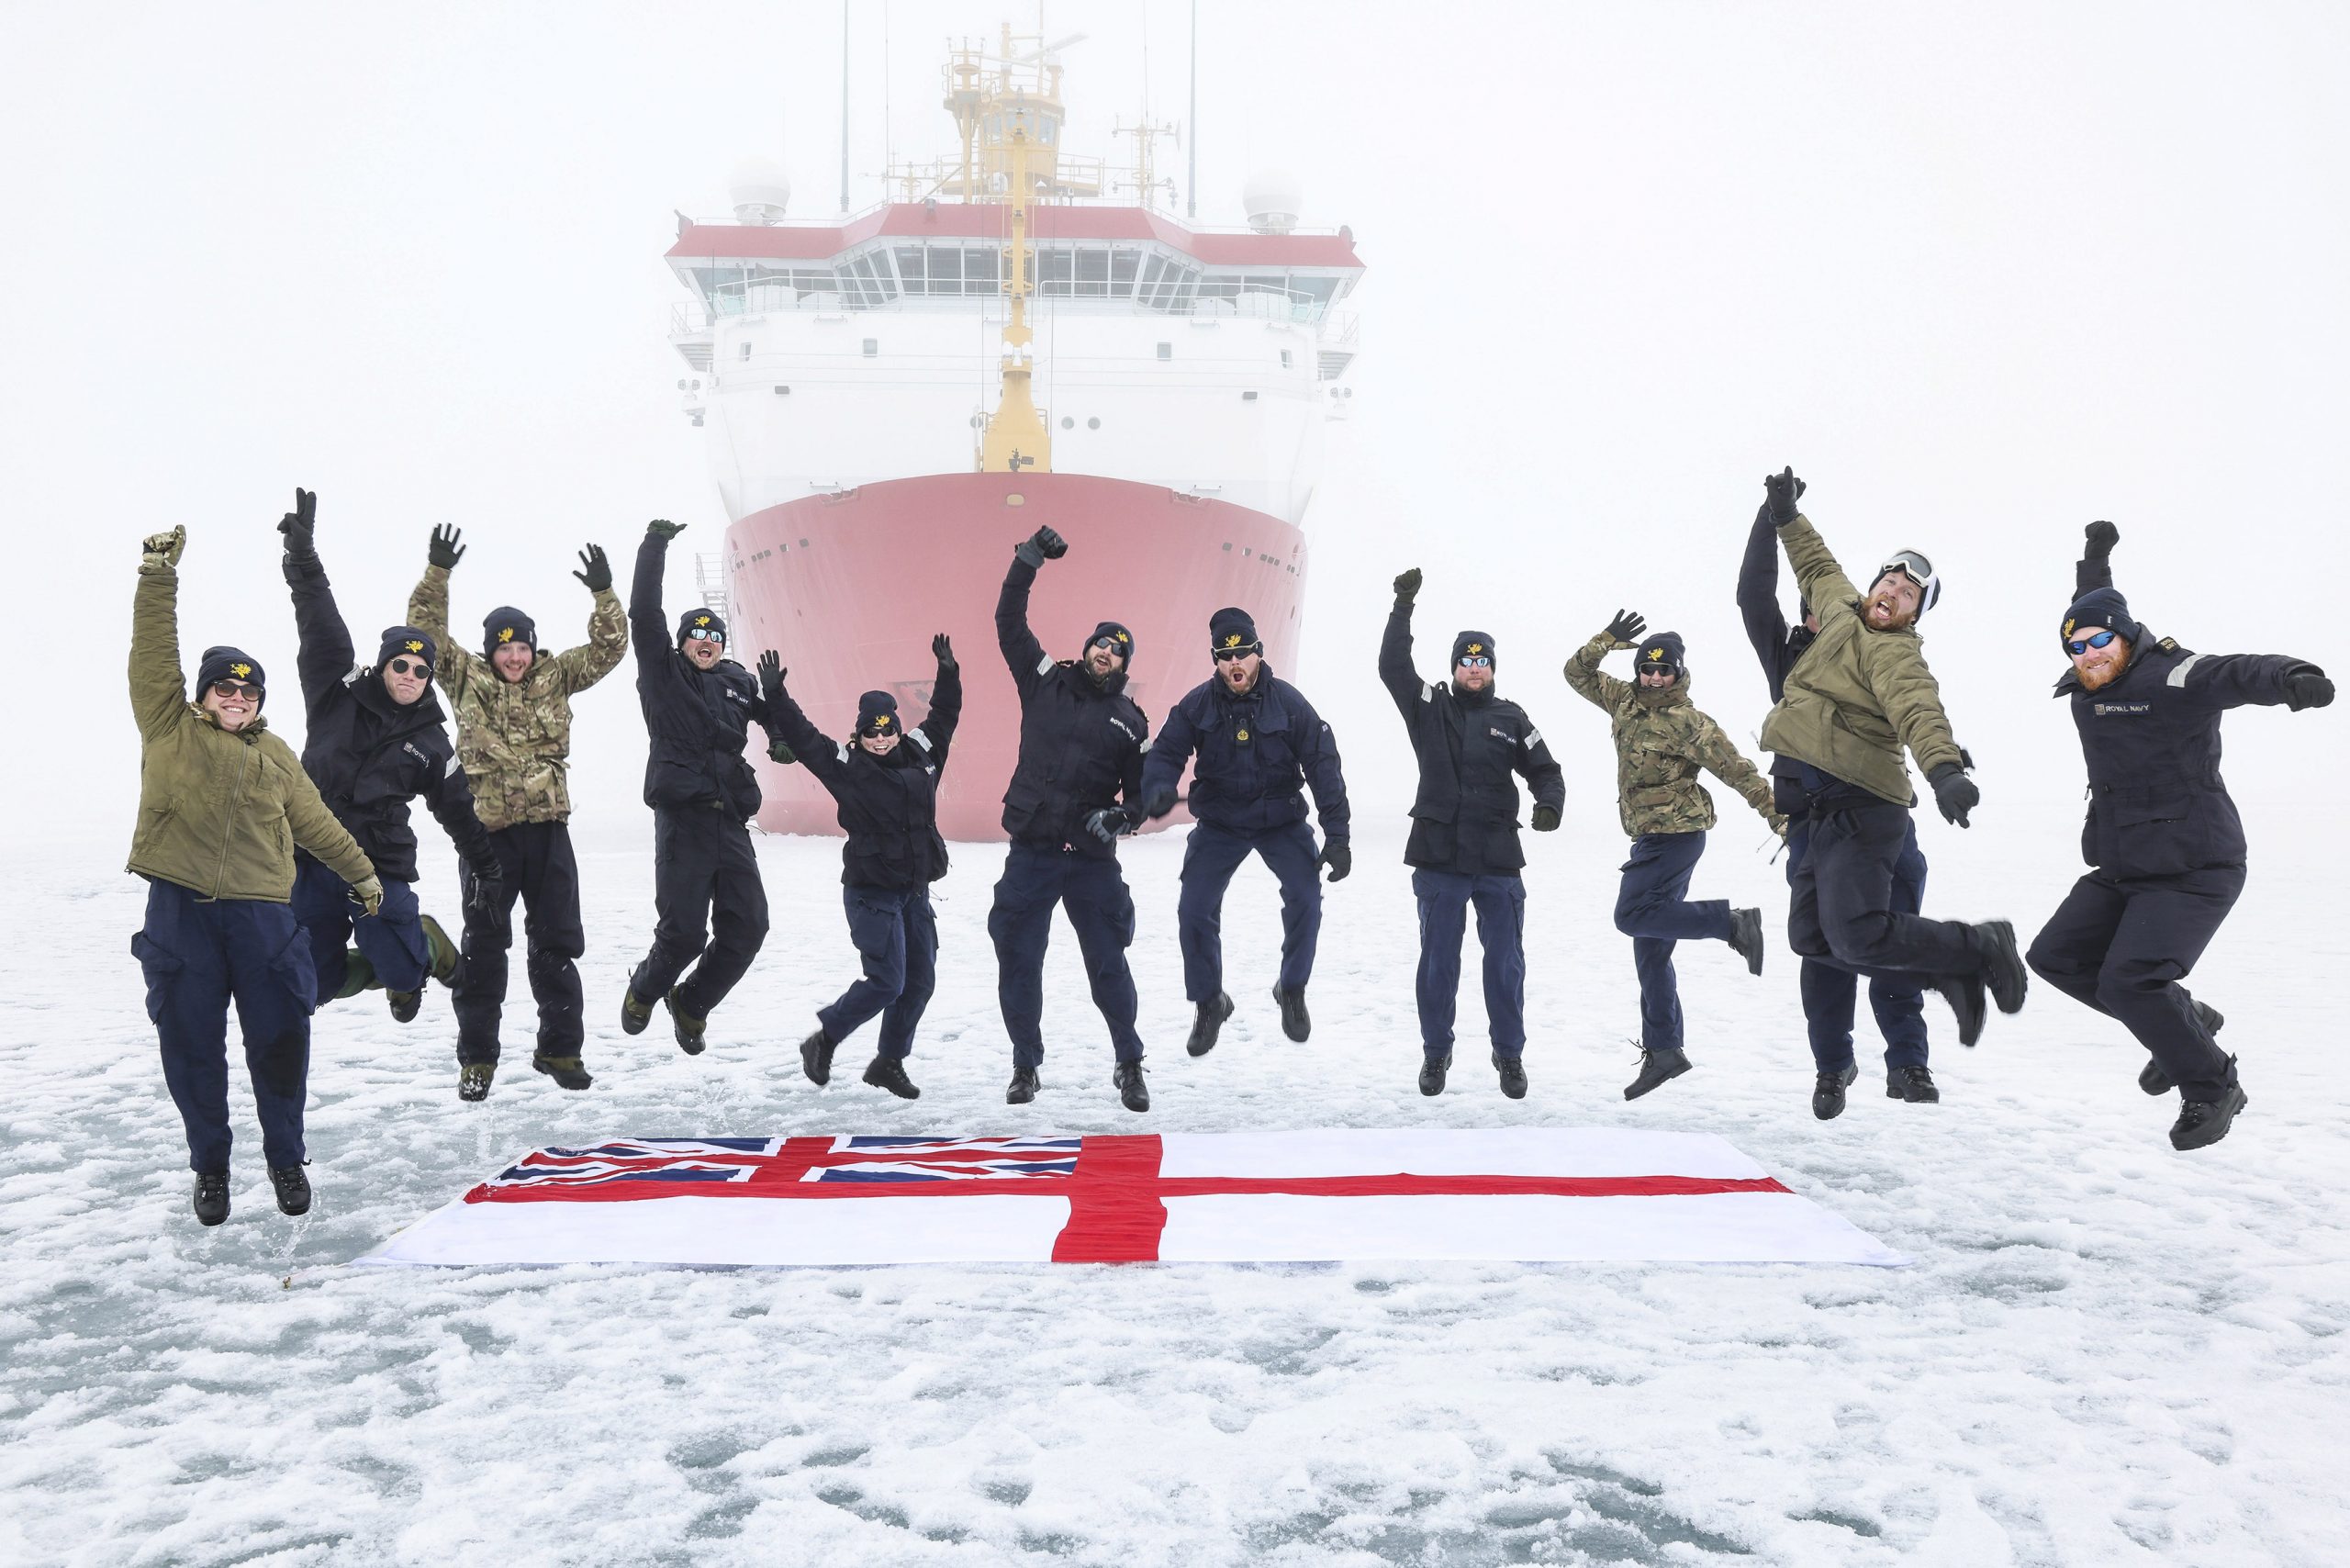 HMS Protector's Hydrographic department on the ice.